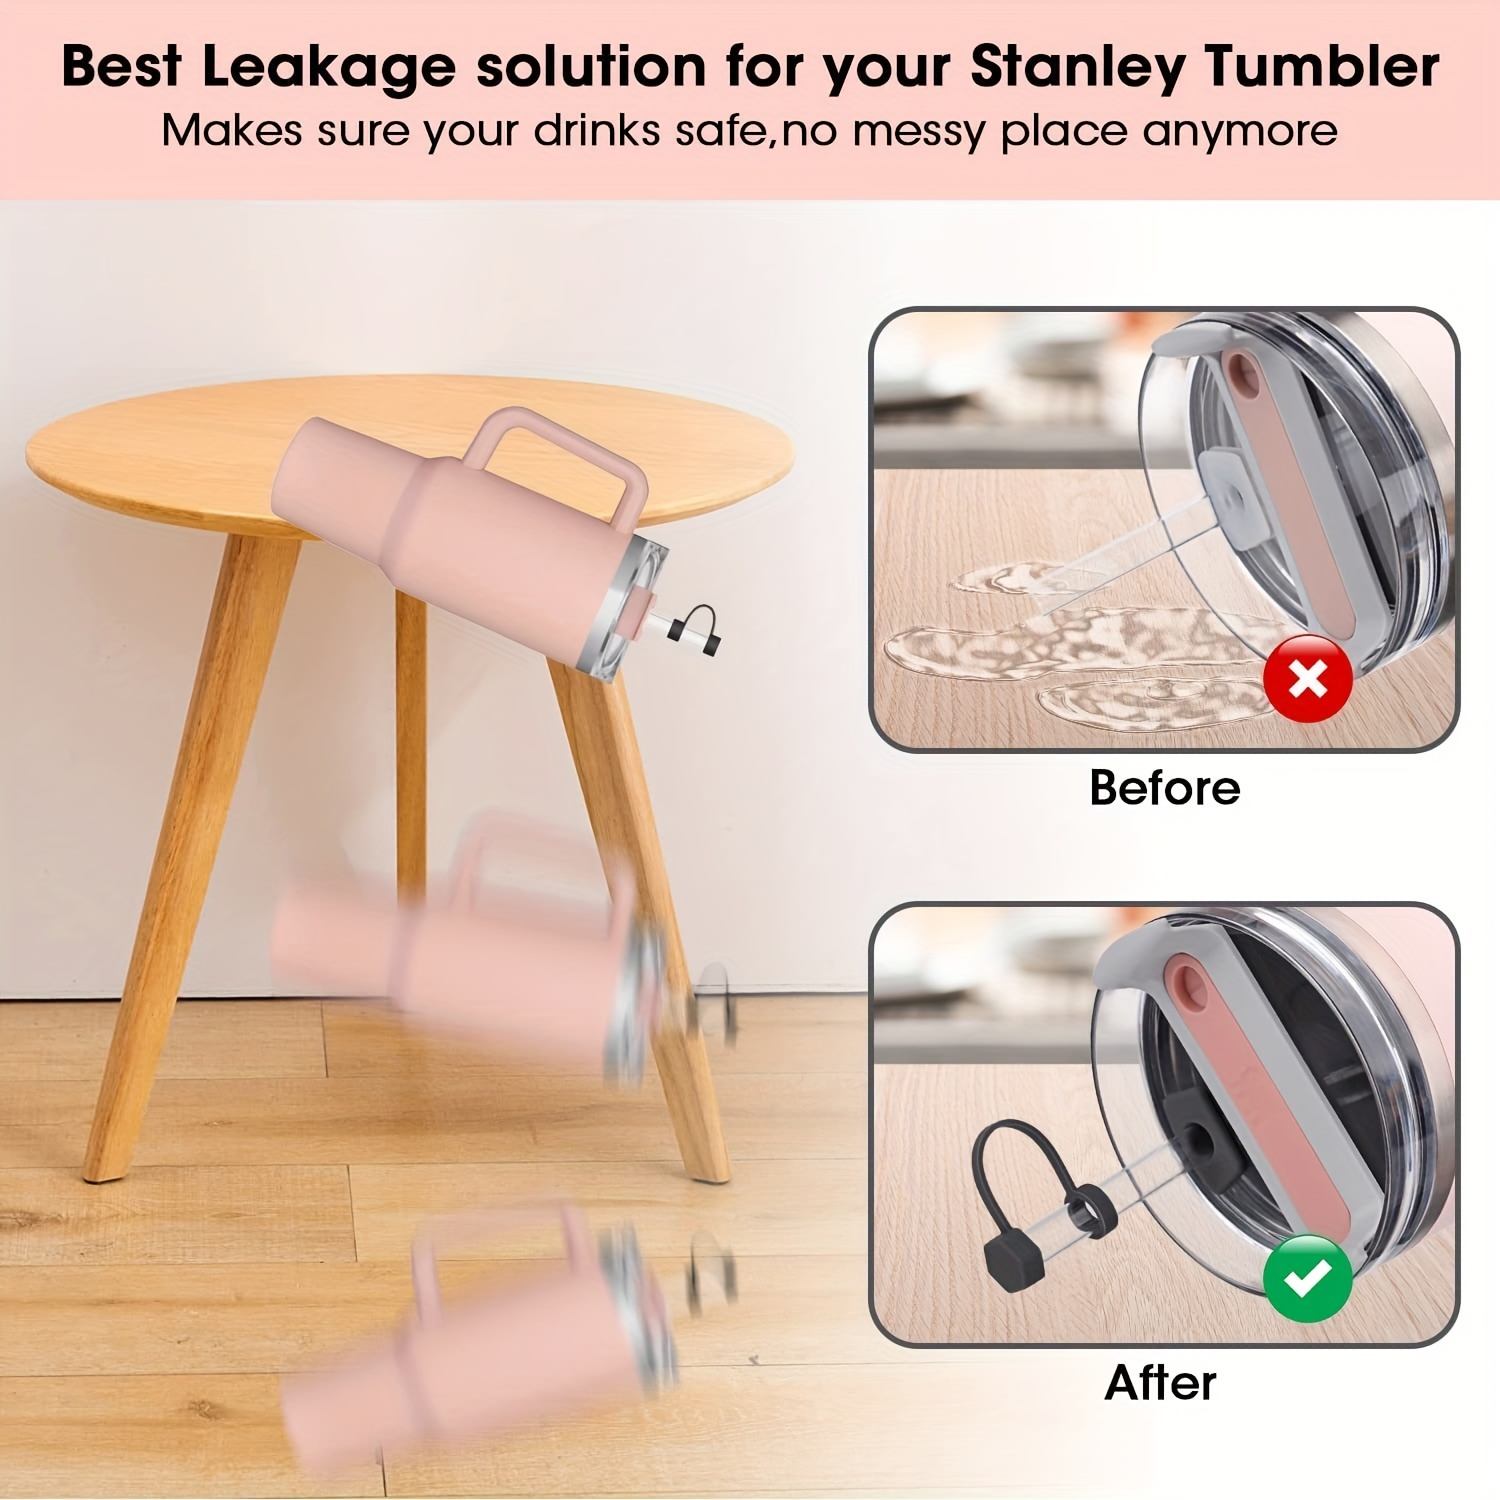 The Stahp & Go Spill-Proof Topper for Stanley Tumblers Is Genius – SheKnows